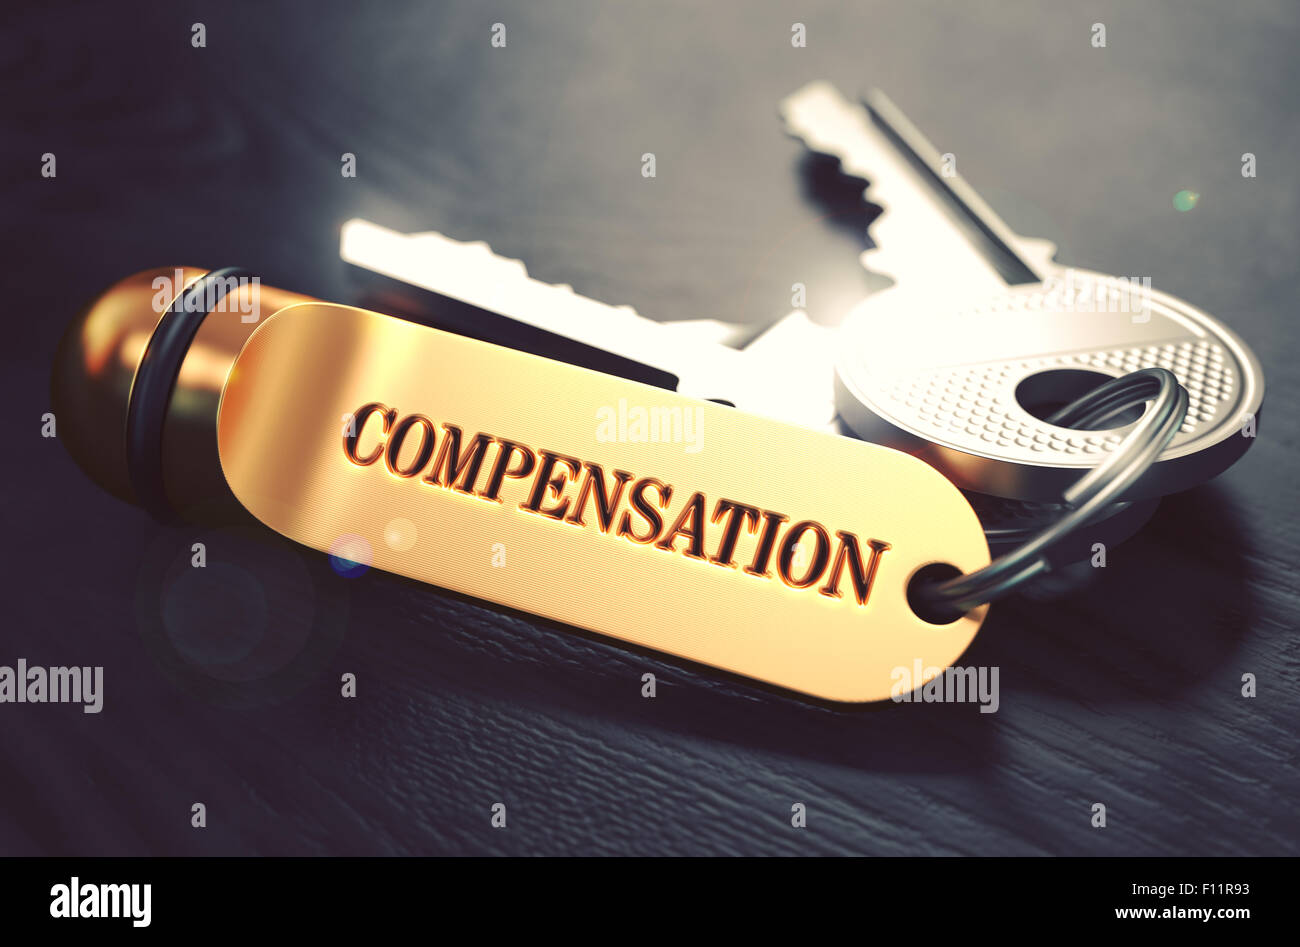 Keys with Word Compensation on Golden Label. Stock Photo